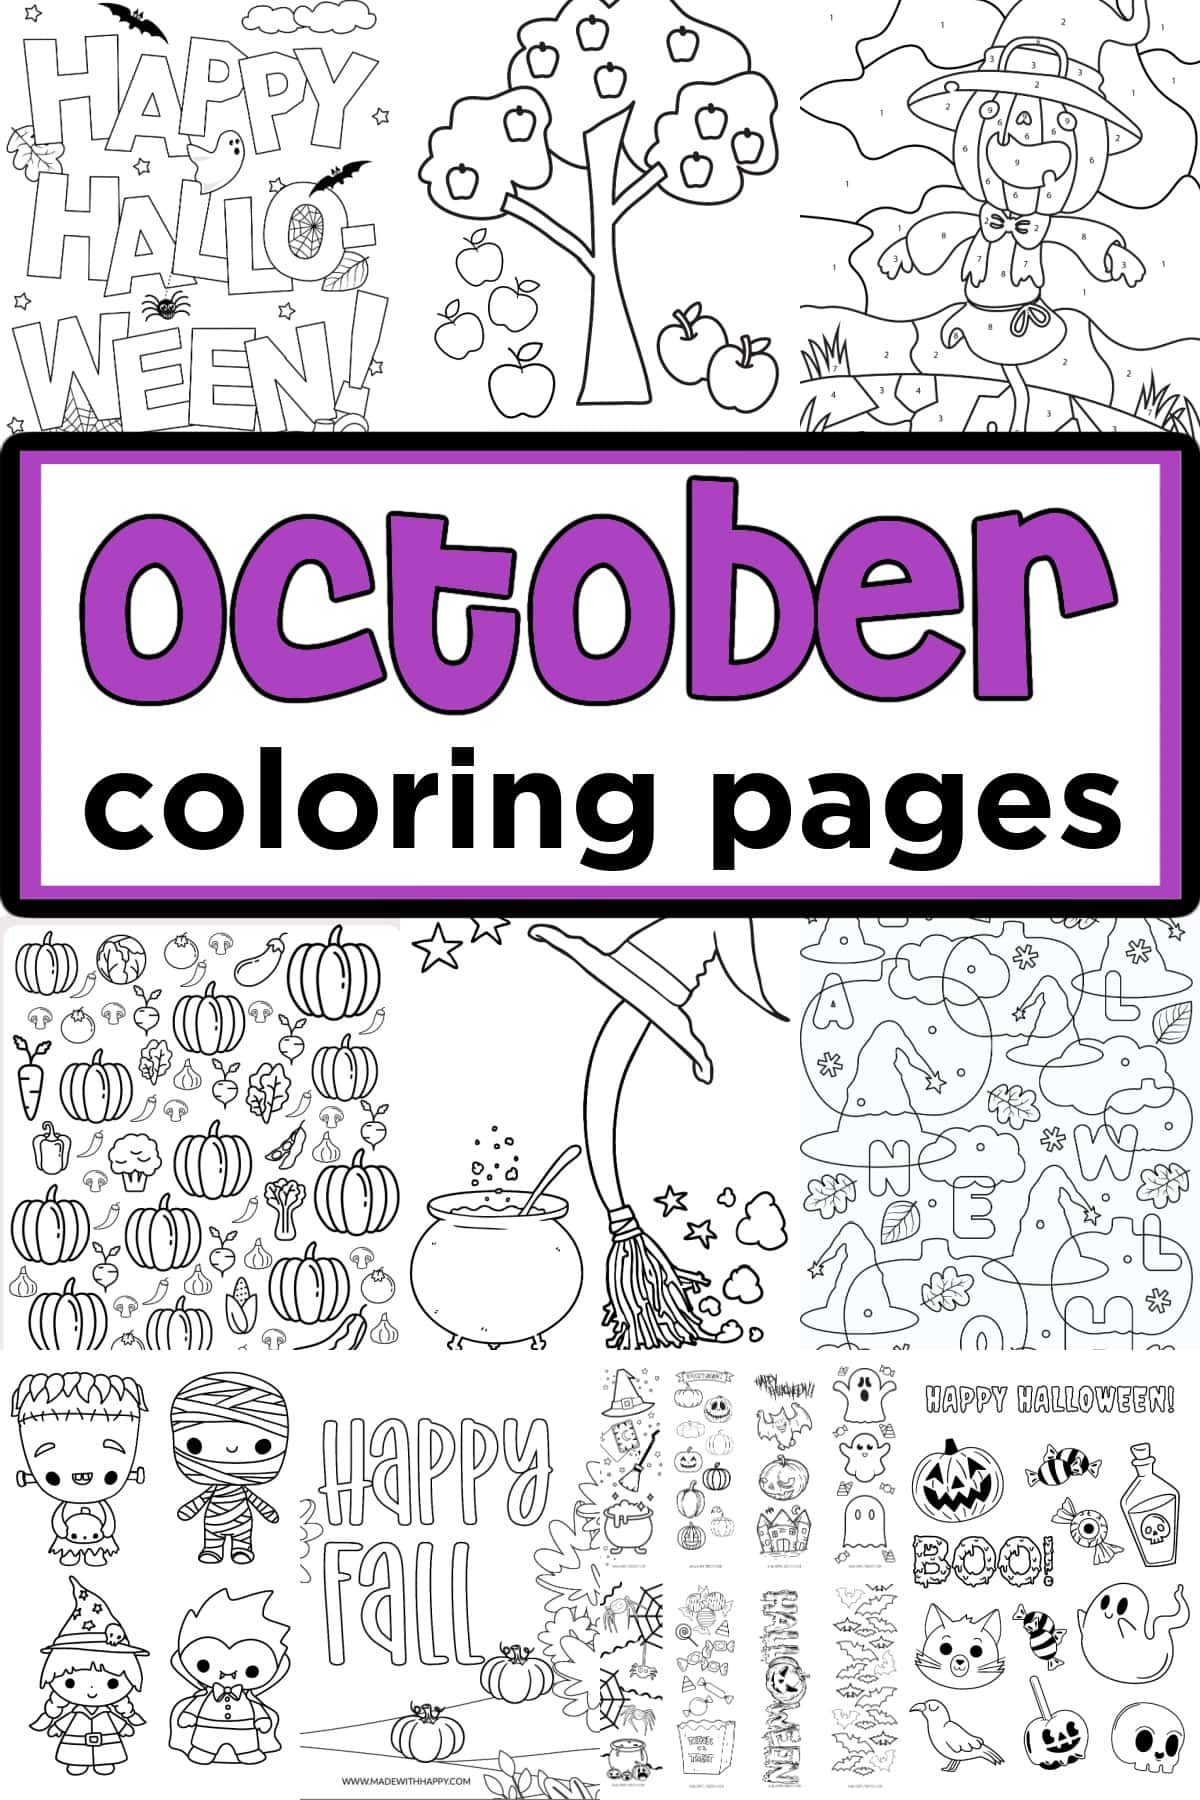 Octoboer color pages